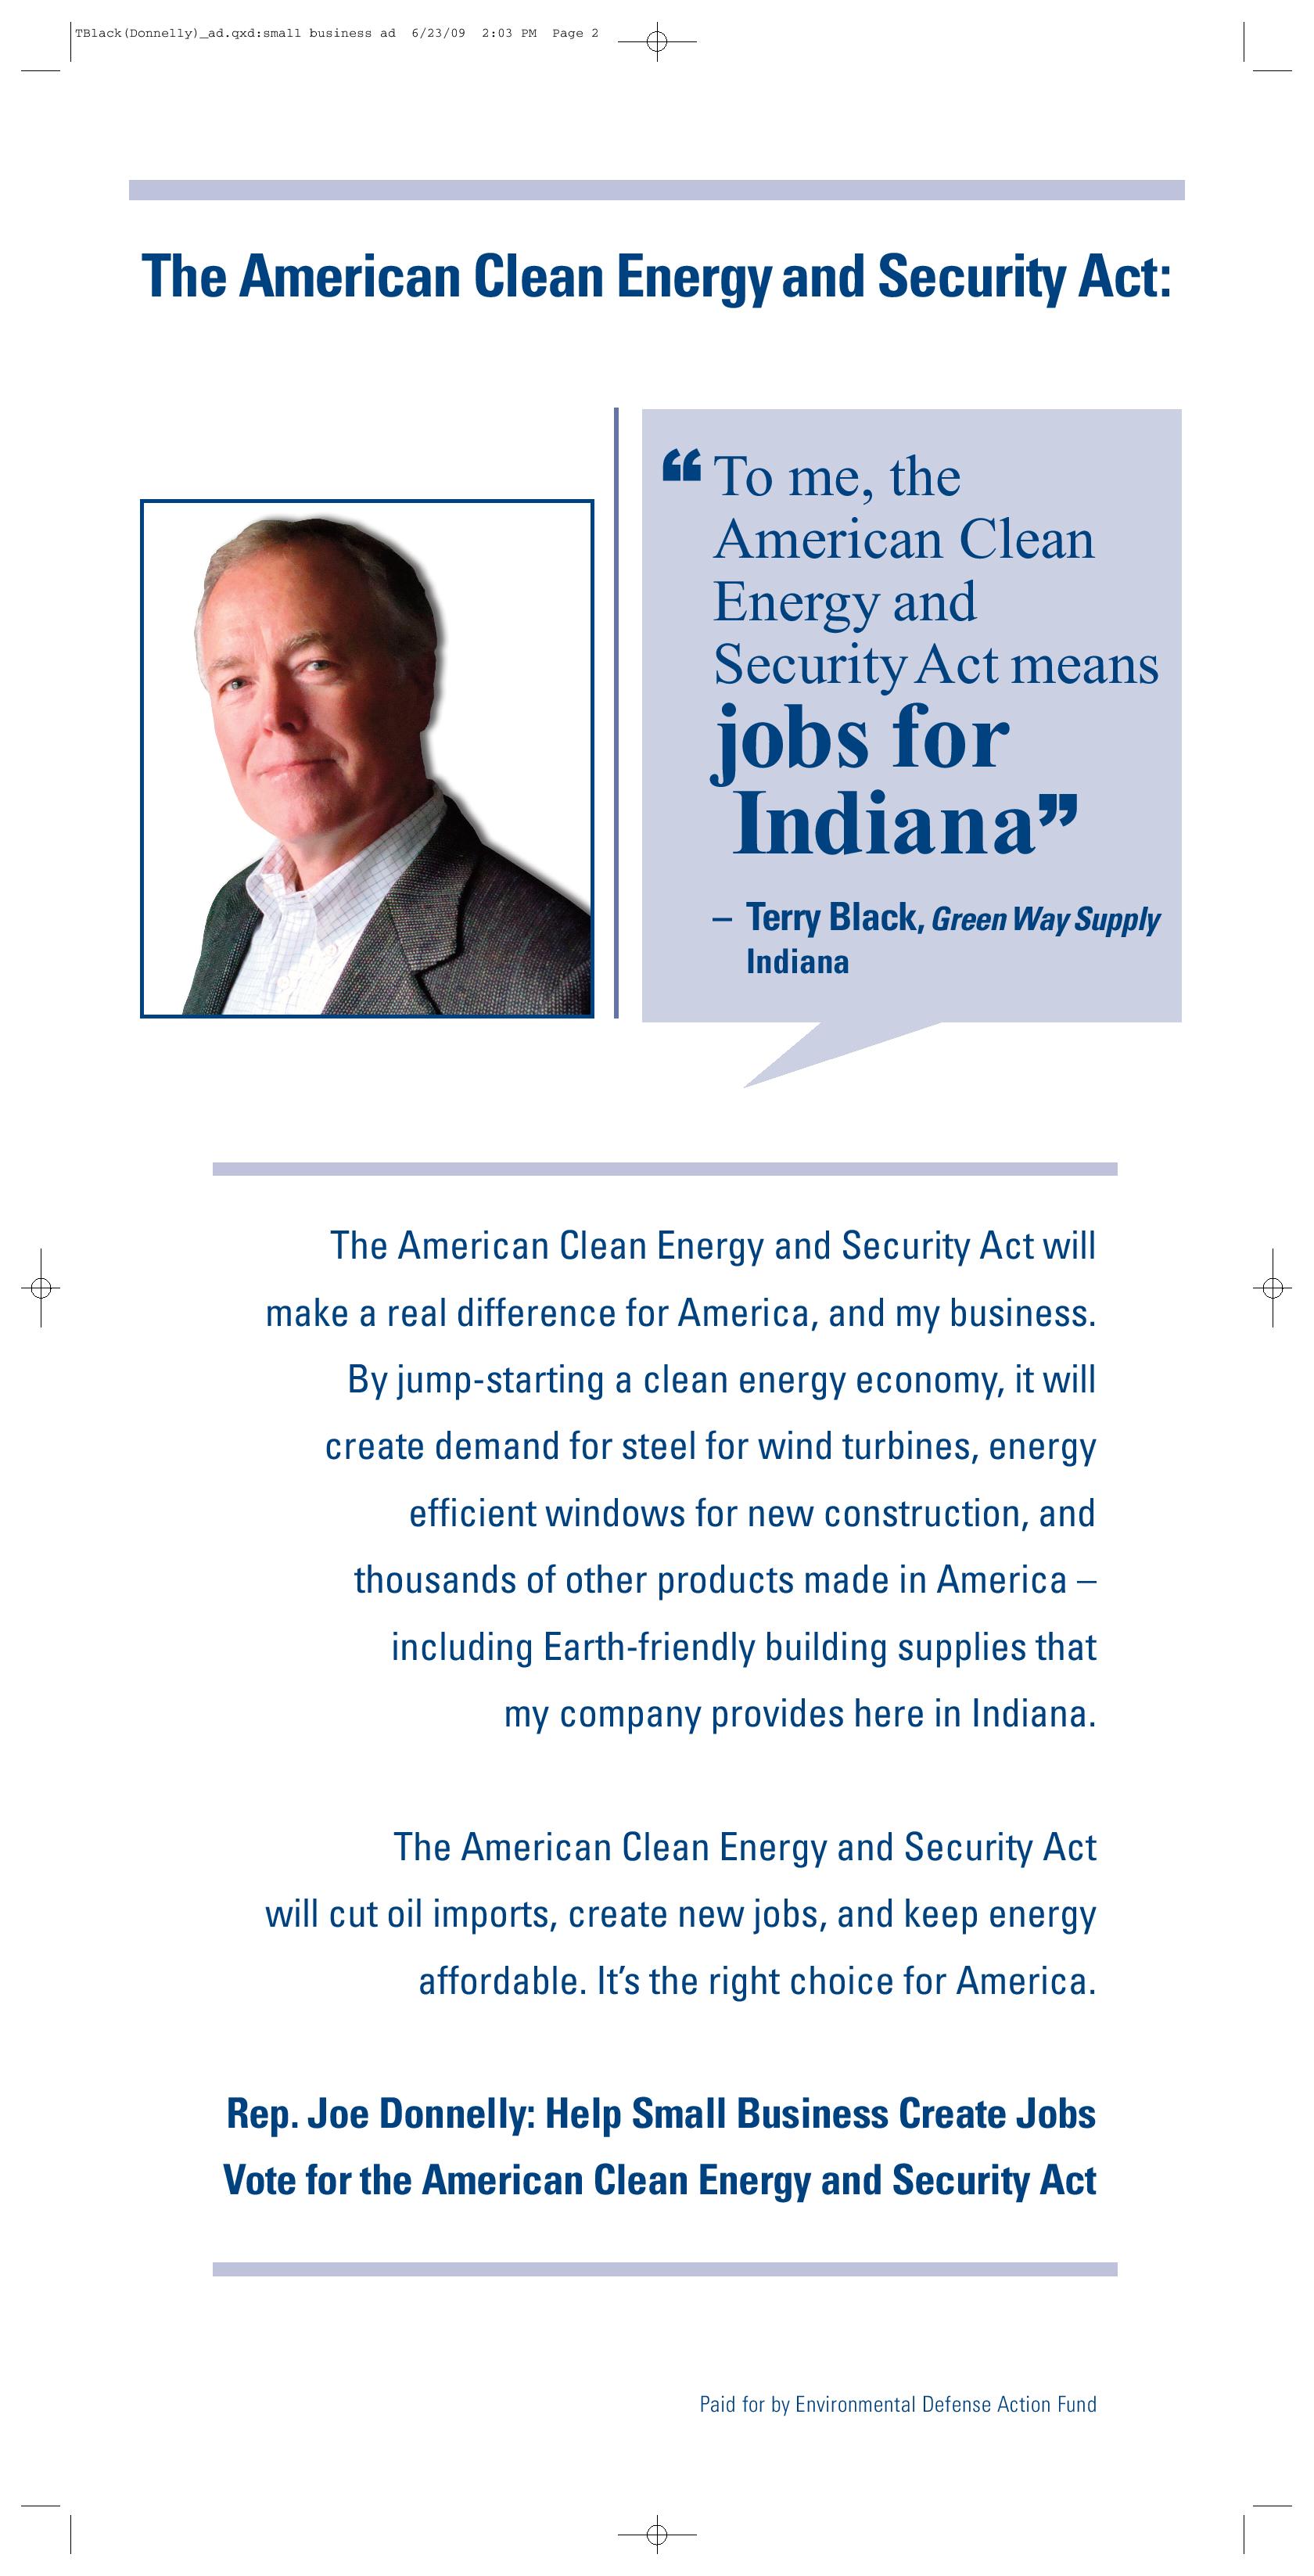 Help Small Businesses Create Jobs: Rep. Joe Donnelly